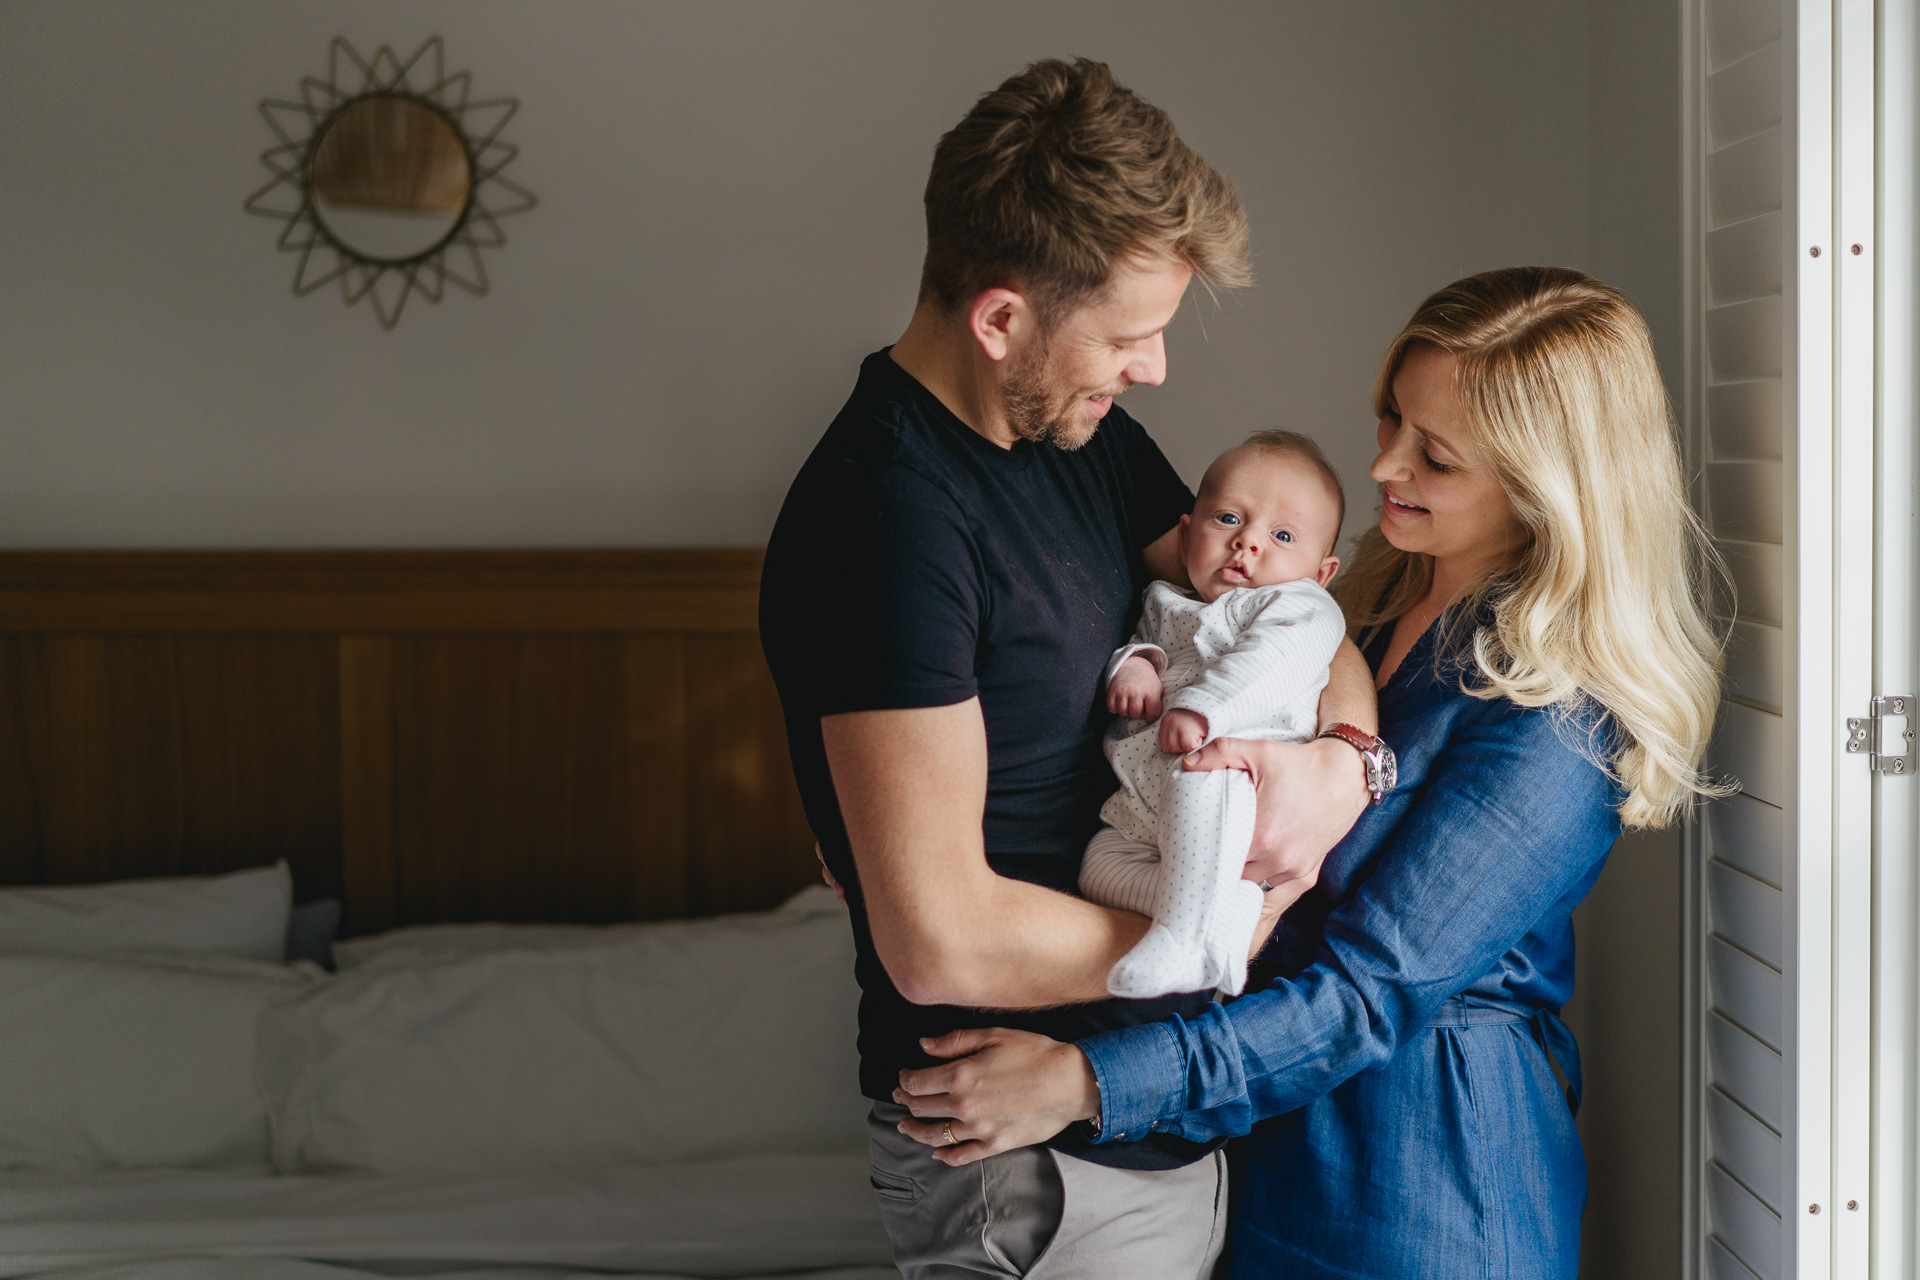 Mother and father cuddling a small baby together during a Dorset family photography shoot at home